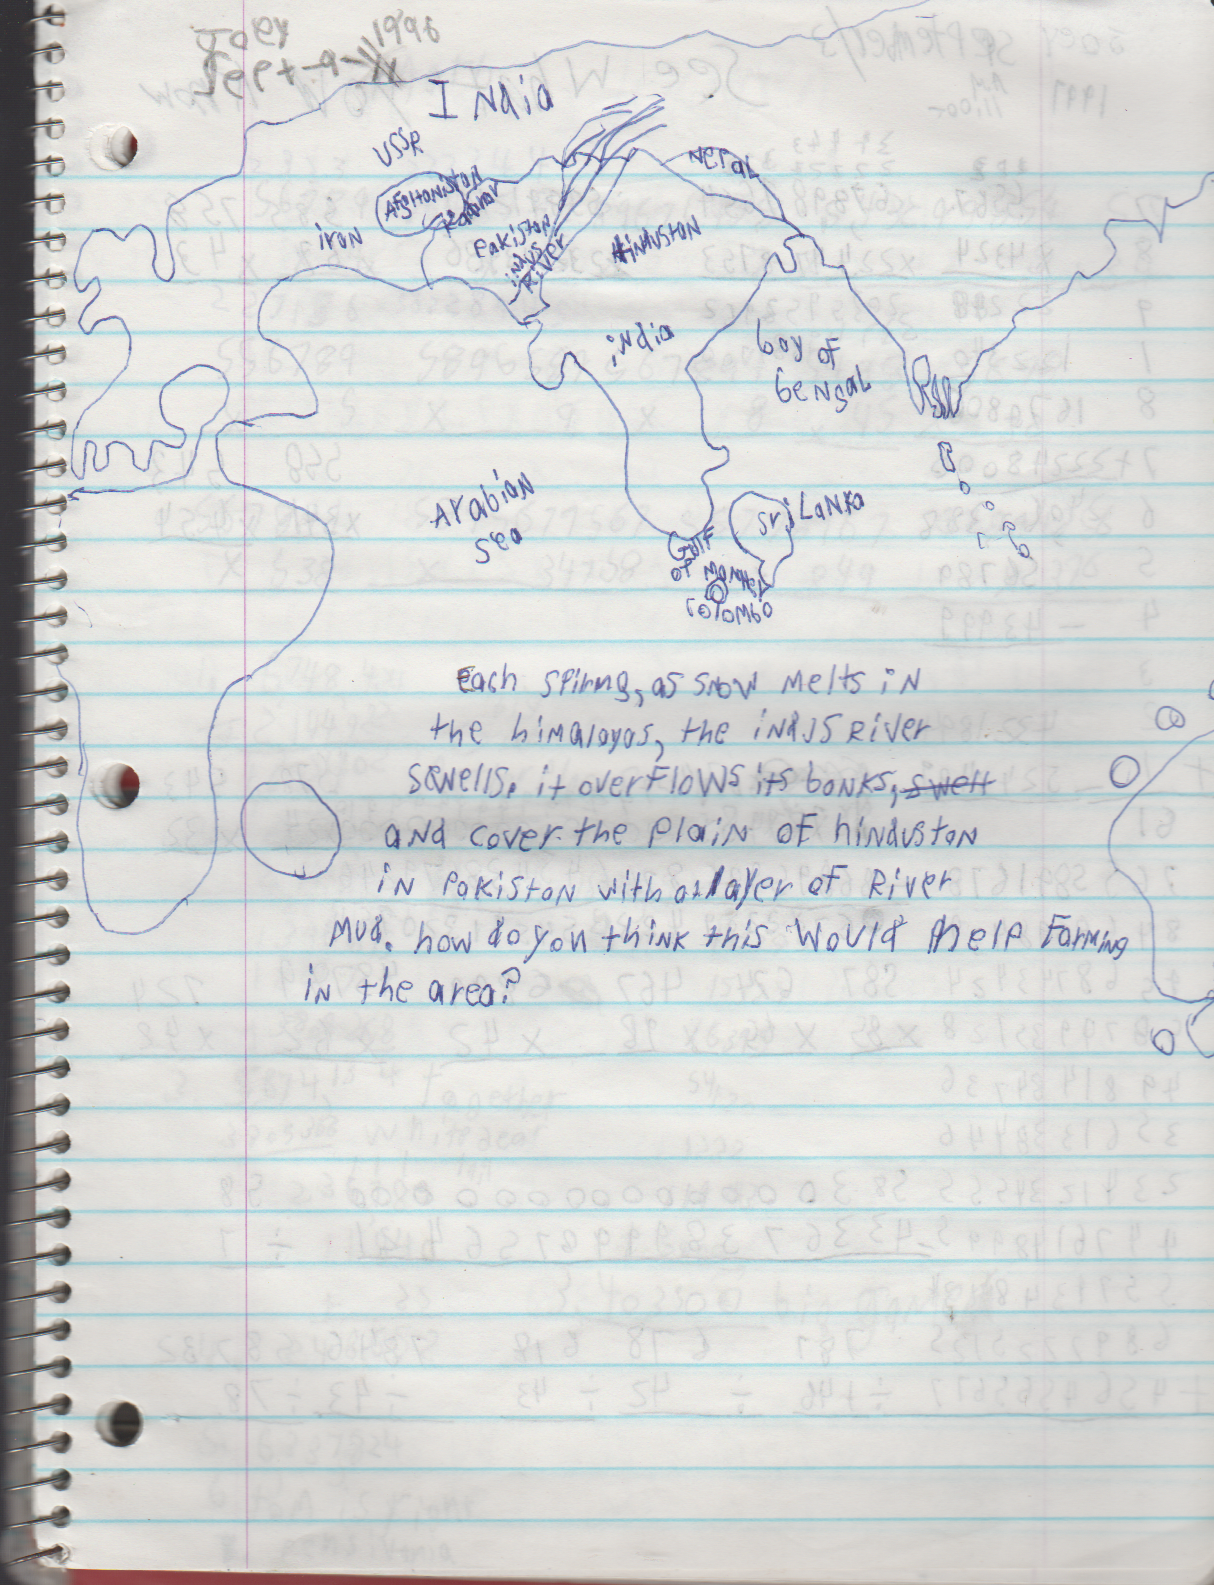 1996-08-18 - Saturday - 11 yr old Joey Arnold's School Book, dates through to 1998 apx, mostly 96, Writings, Drawings, Etc-023.png